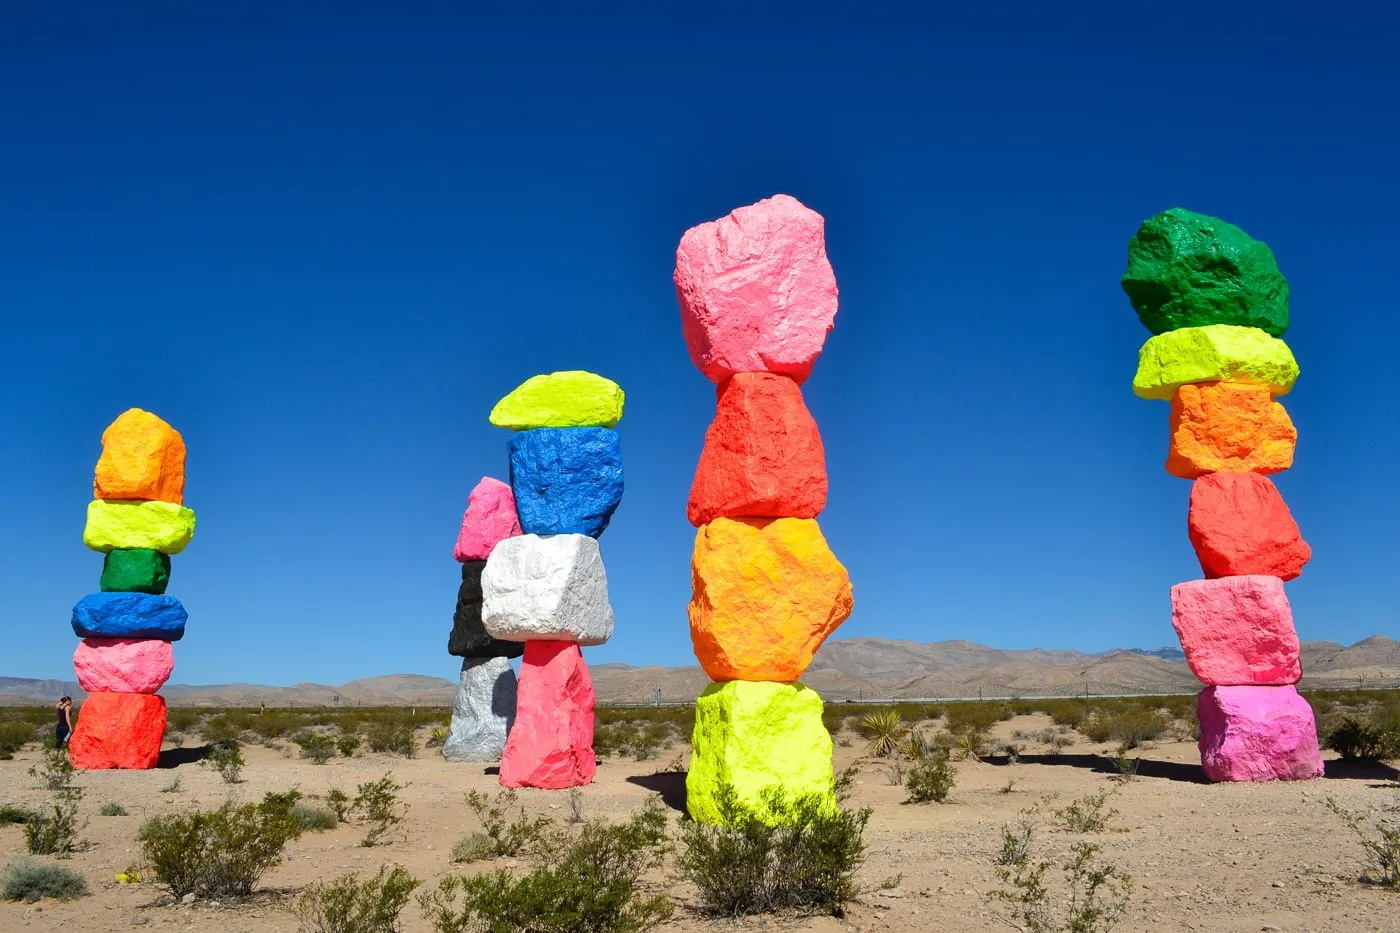 The best Nevada roadside attractions to visit on a Nevada road trip. Add these roadside oddities to your travel bucket list, itinerary, or route map!